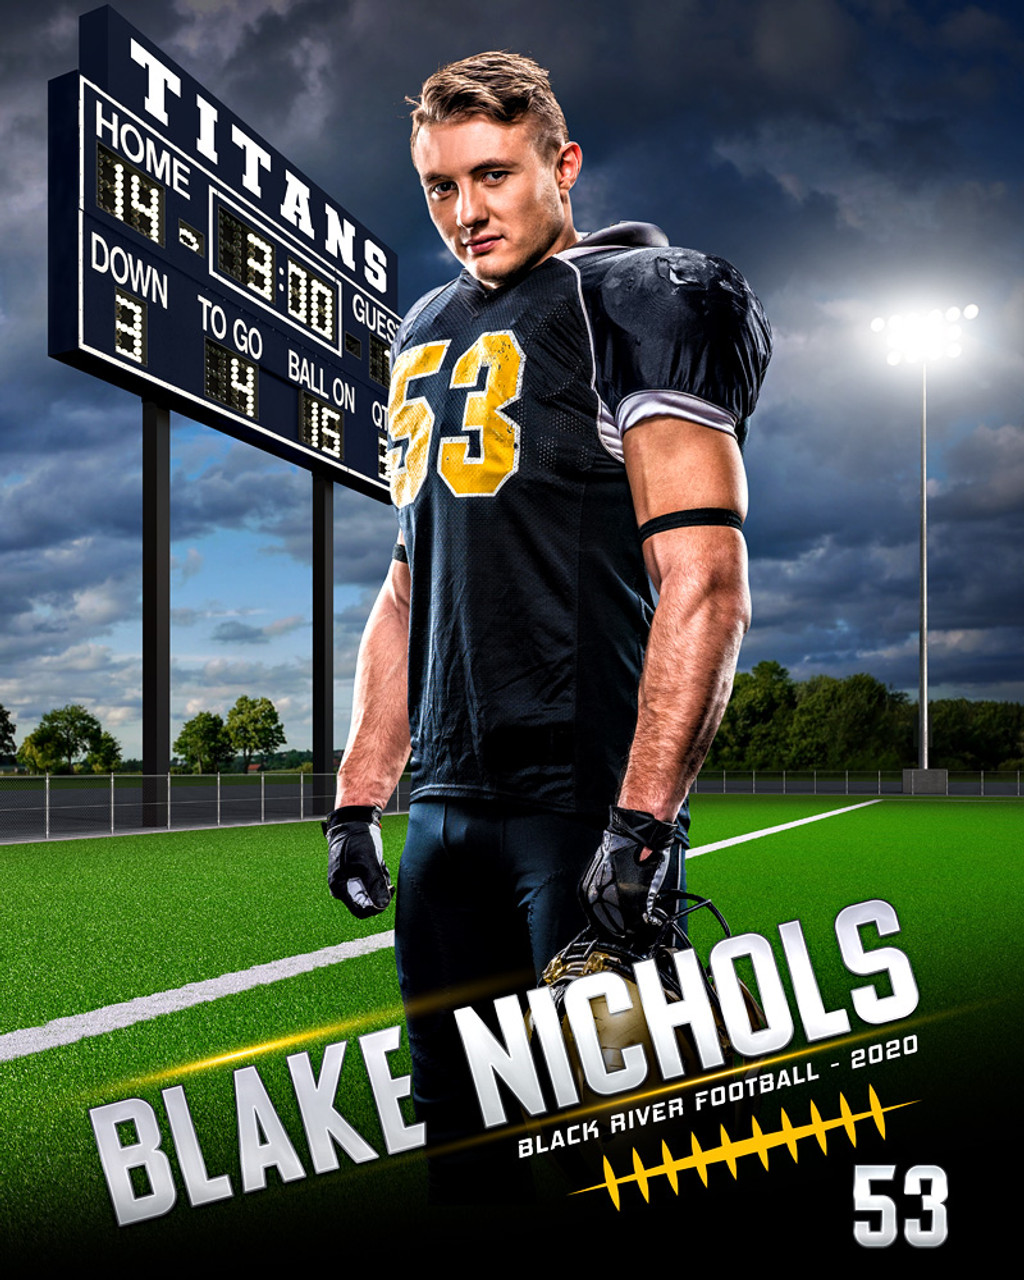 SPORTS POSTER PHOTO TEMPLATE - GAME TIME - FOOTBALL - LAYERED PHOTOSHOP SPORTS TEMPLATE